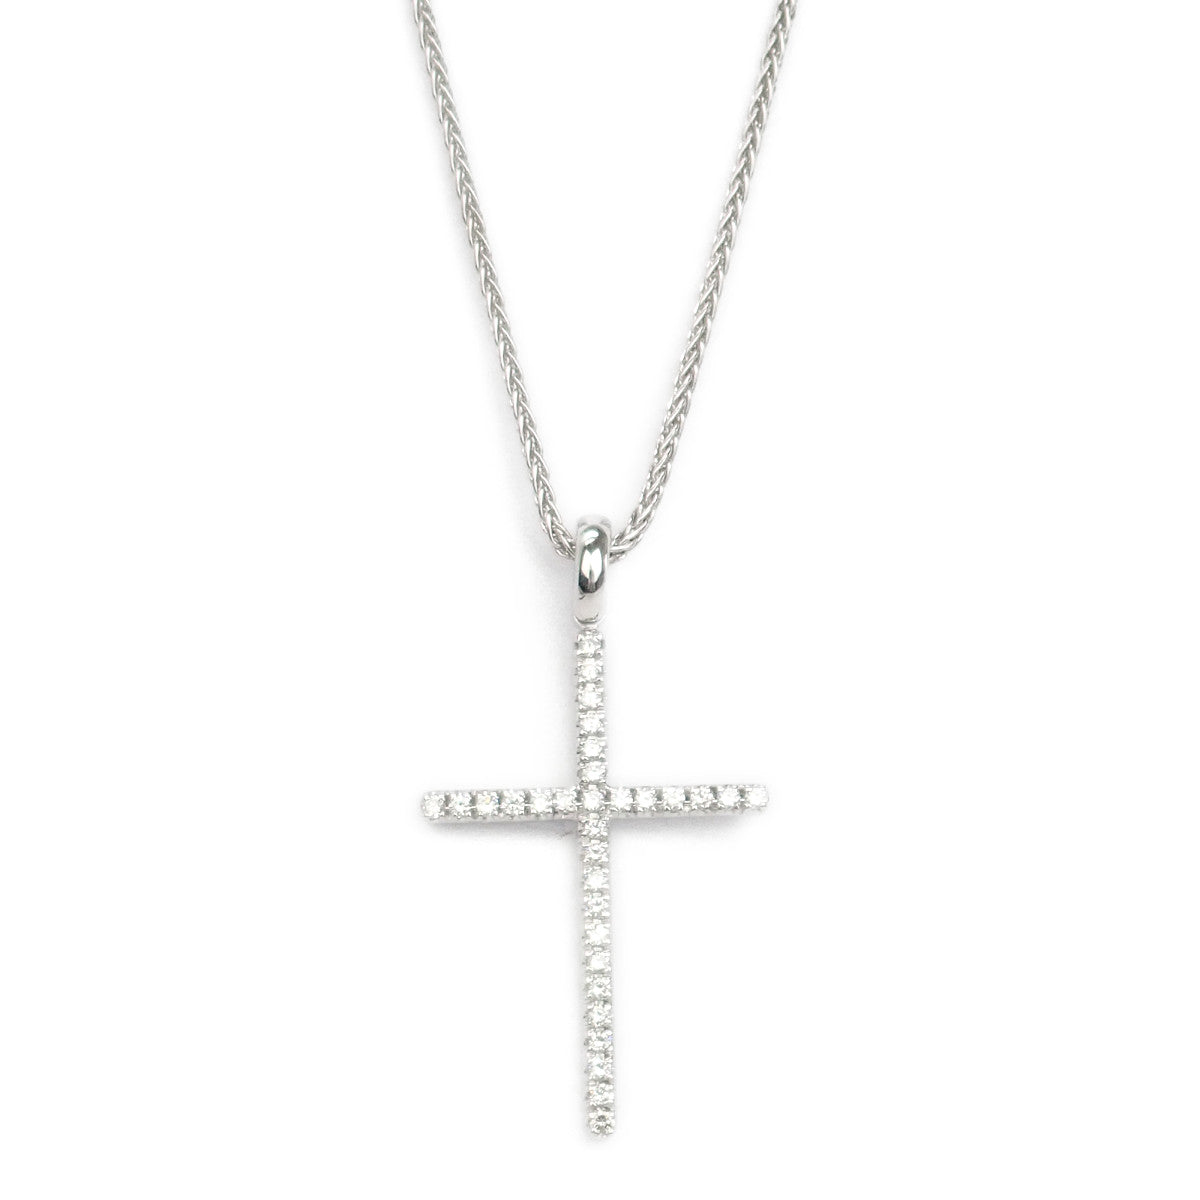 LuxUness  Damiani Mystery Cross K18WG Diamond Necklace, Silver for Women - 434876 2.0000811E7 in Excellent condition